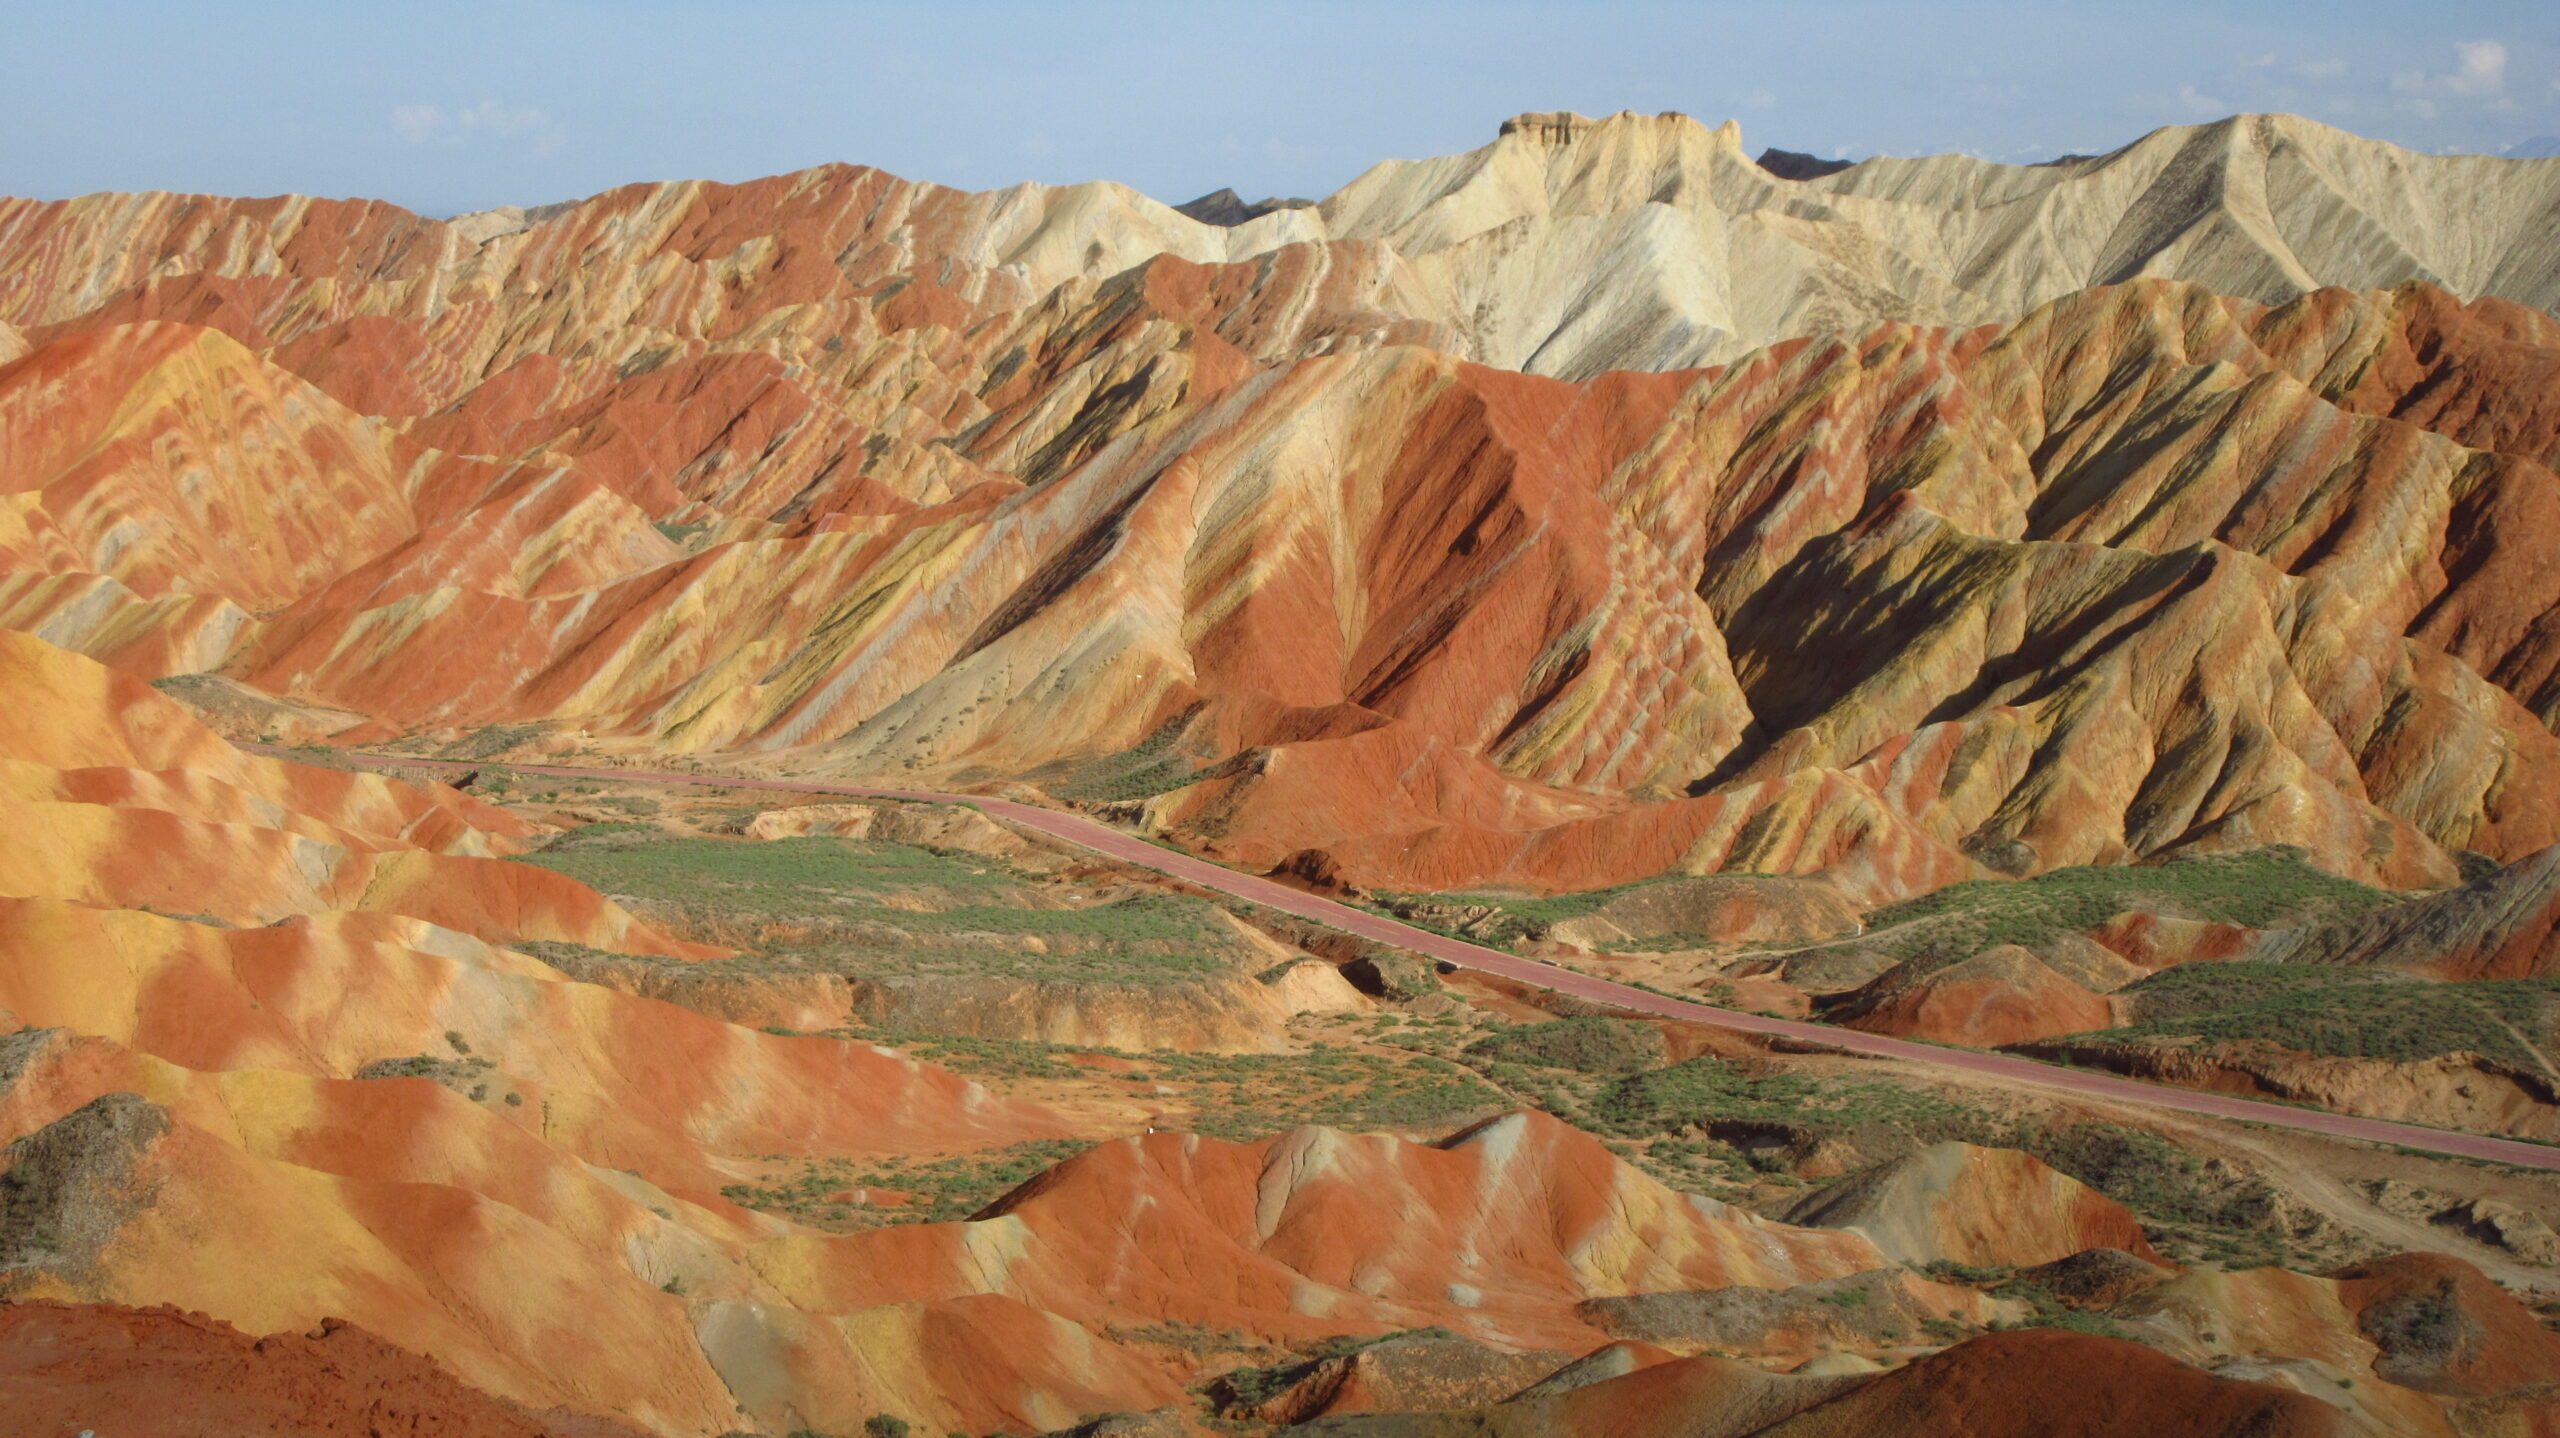 Travel guide: The Rainbow Mountains in Zhangye